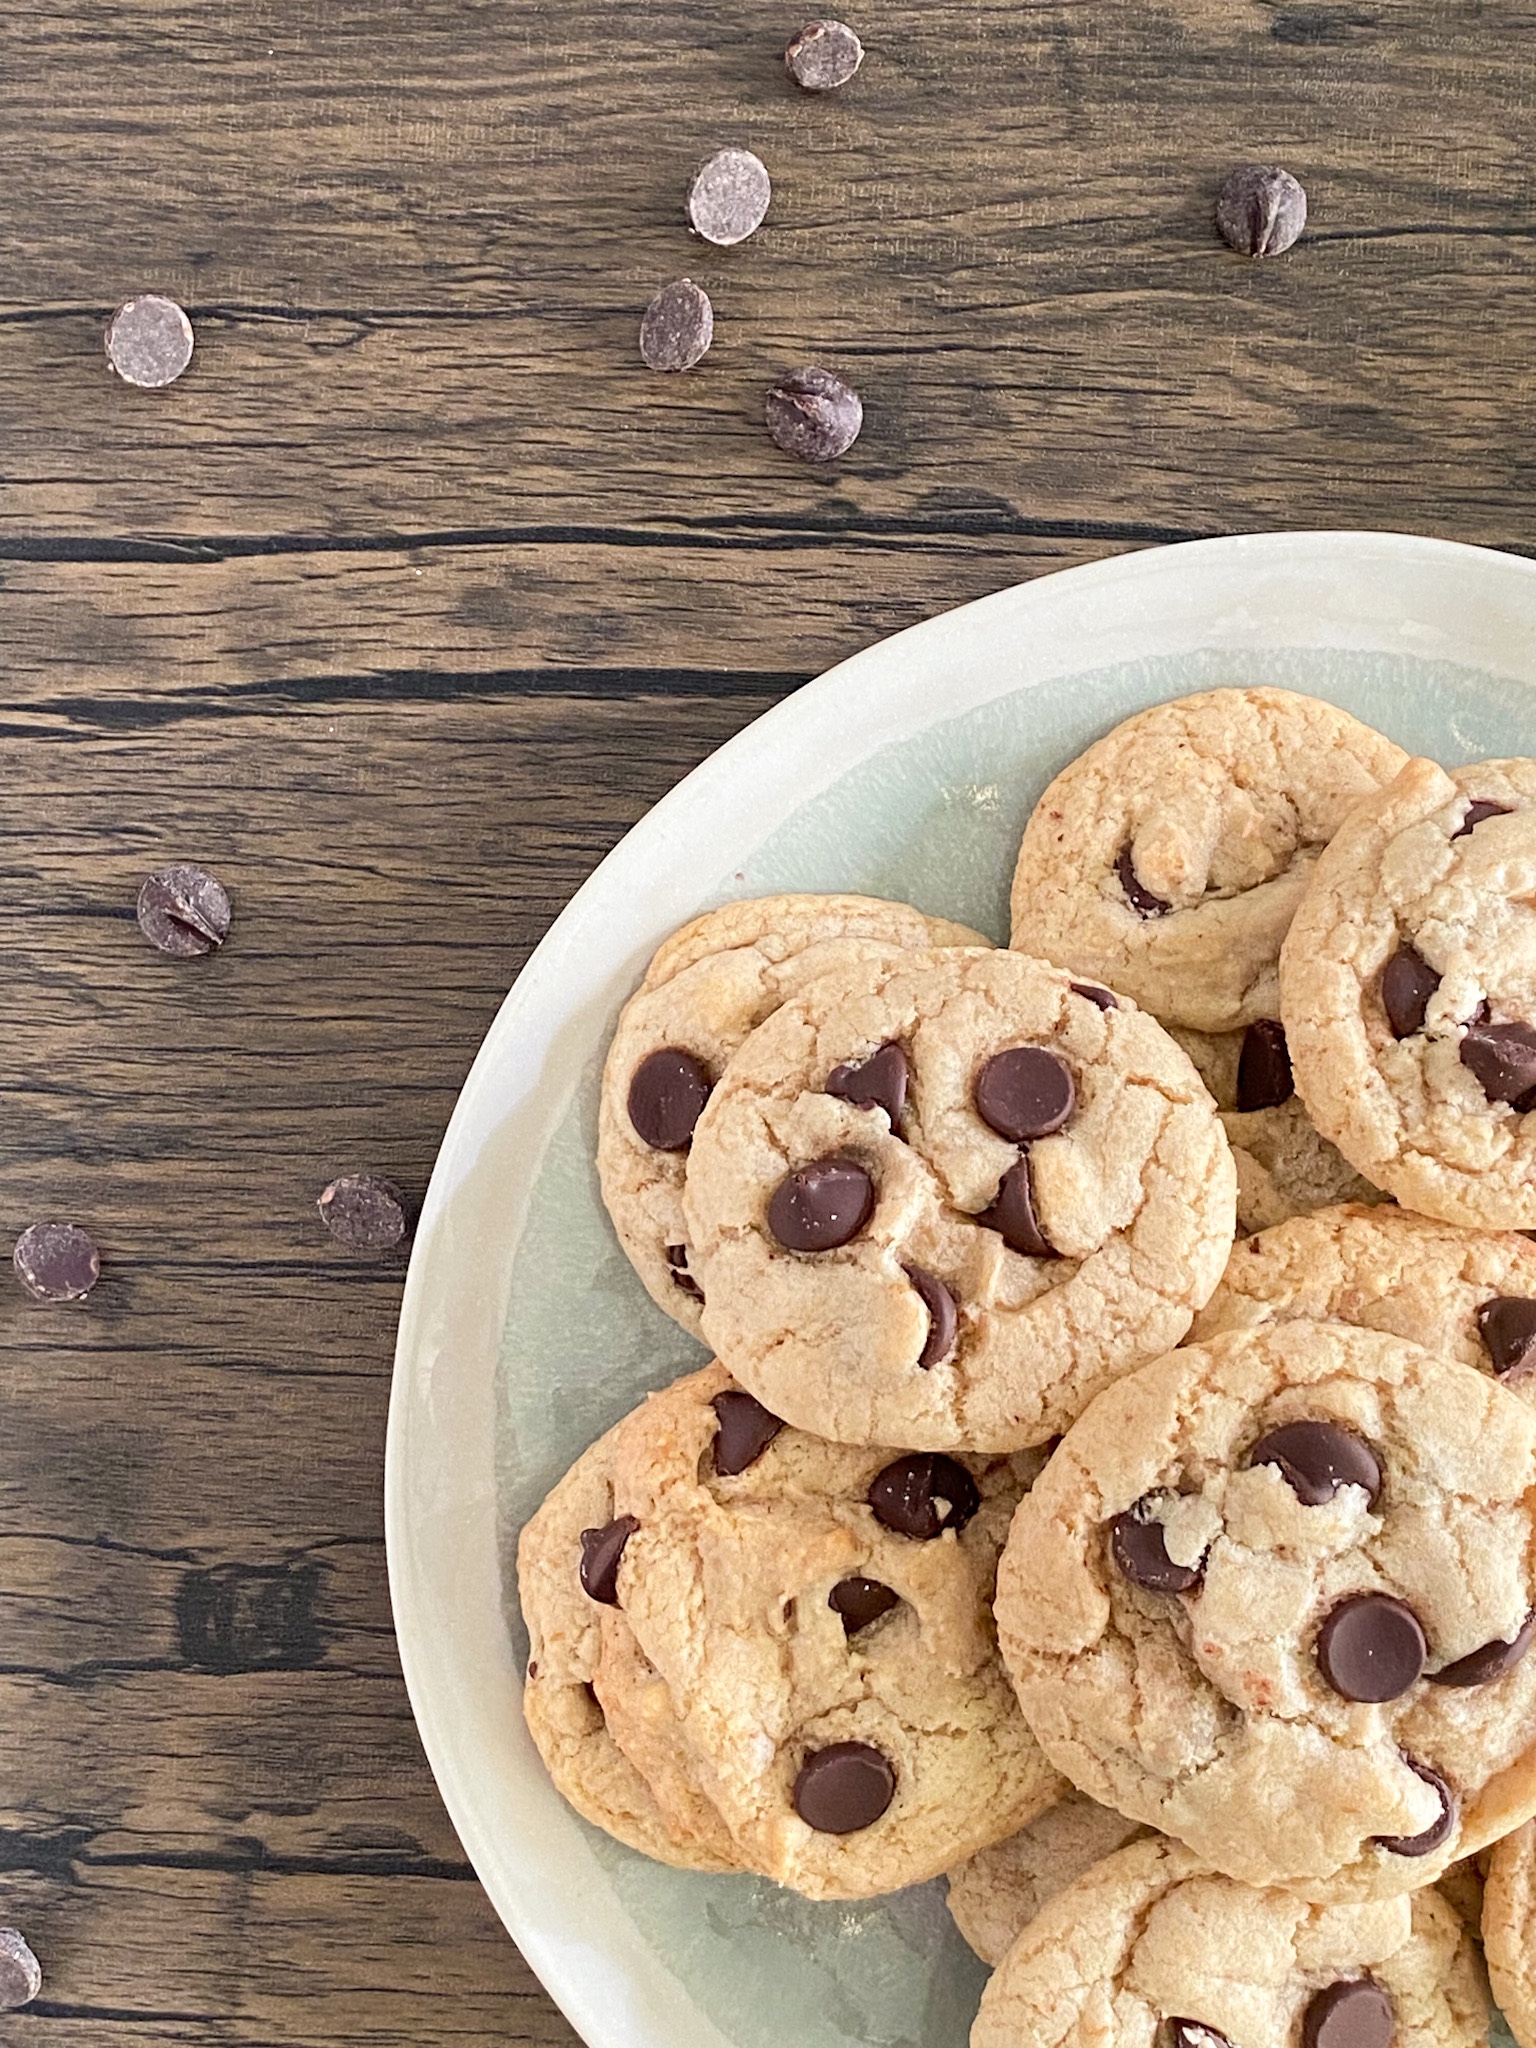 soft vegan chocolate chip cookies are piled on a blue and grey plate that sits on dark wood grain.